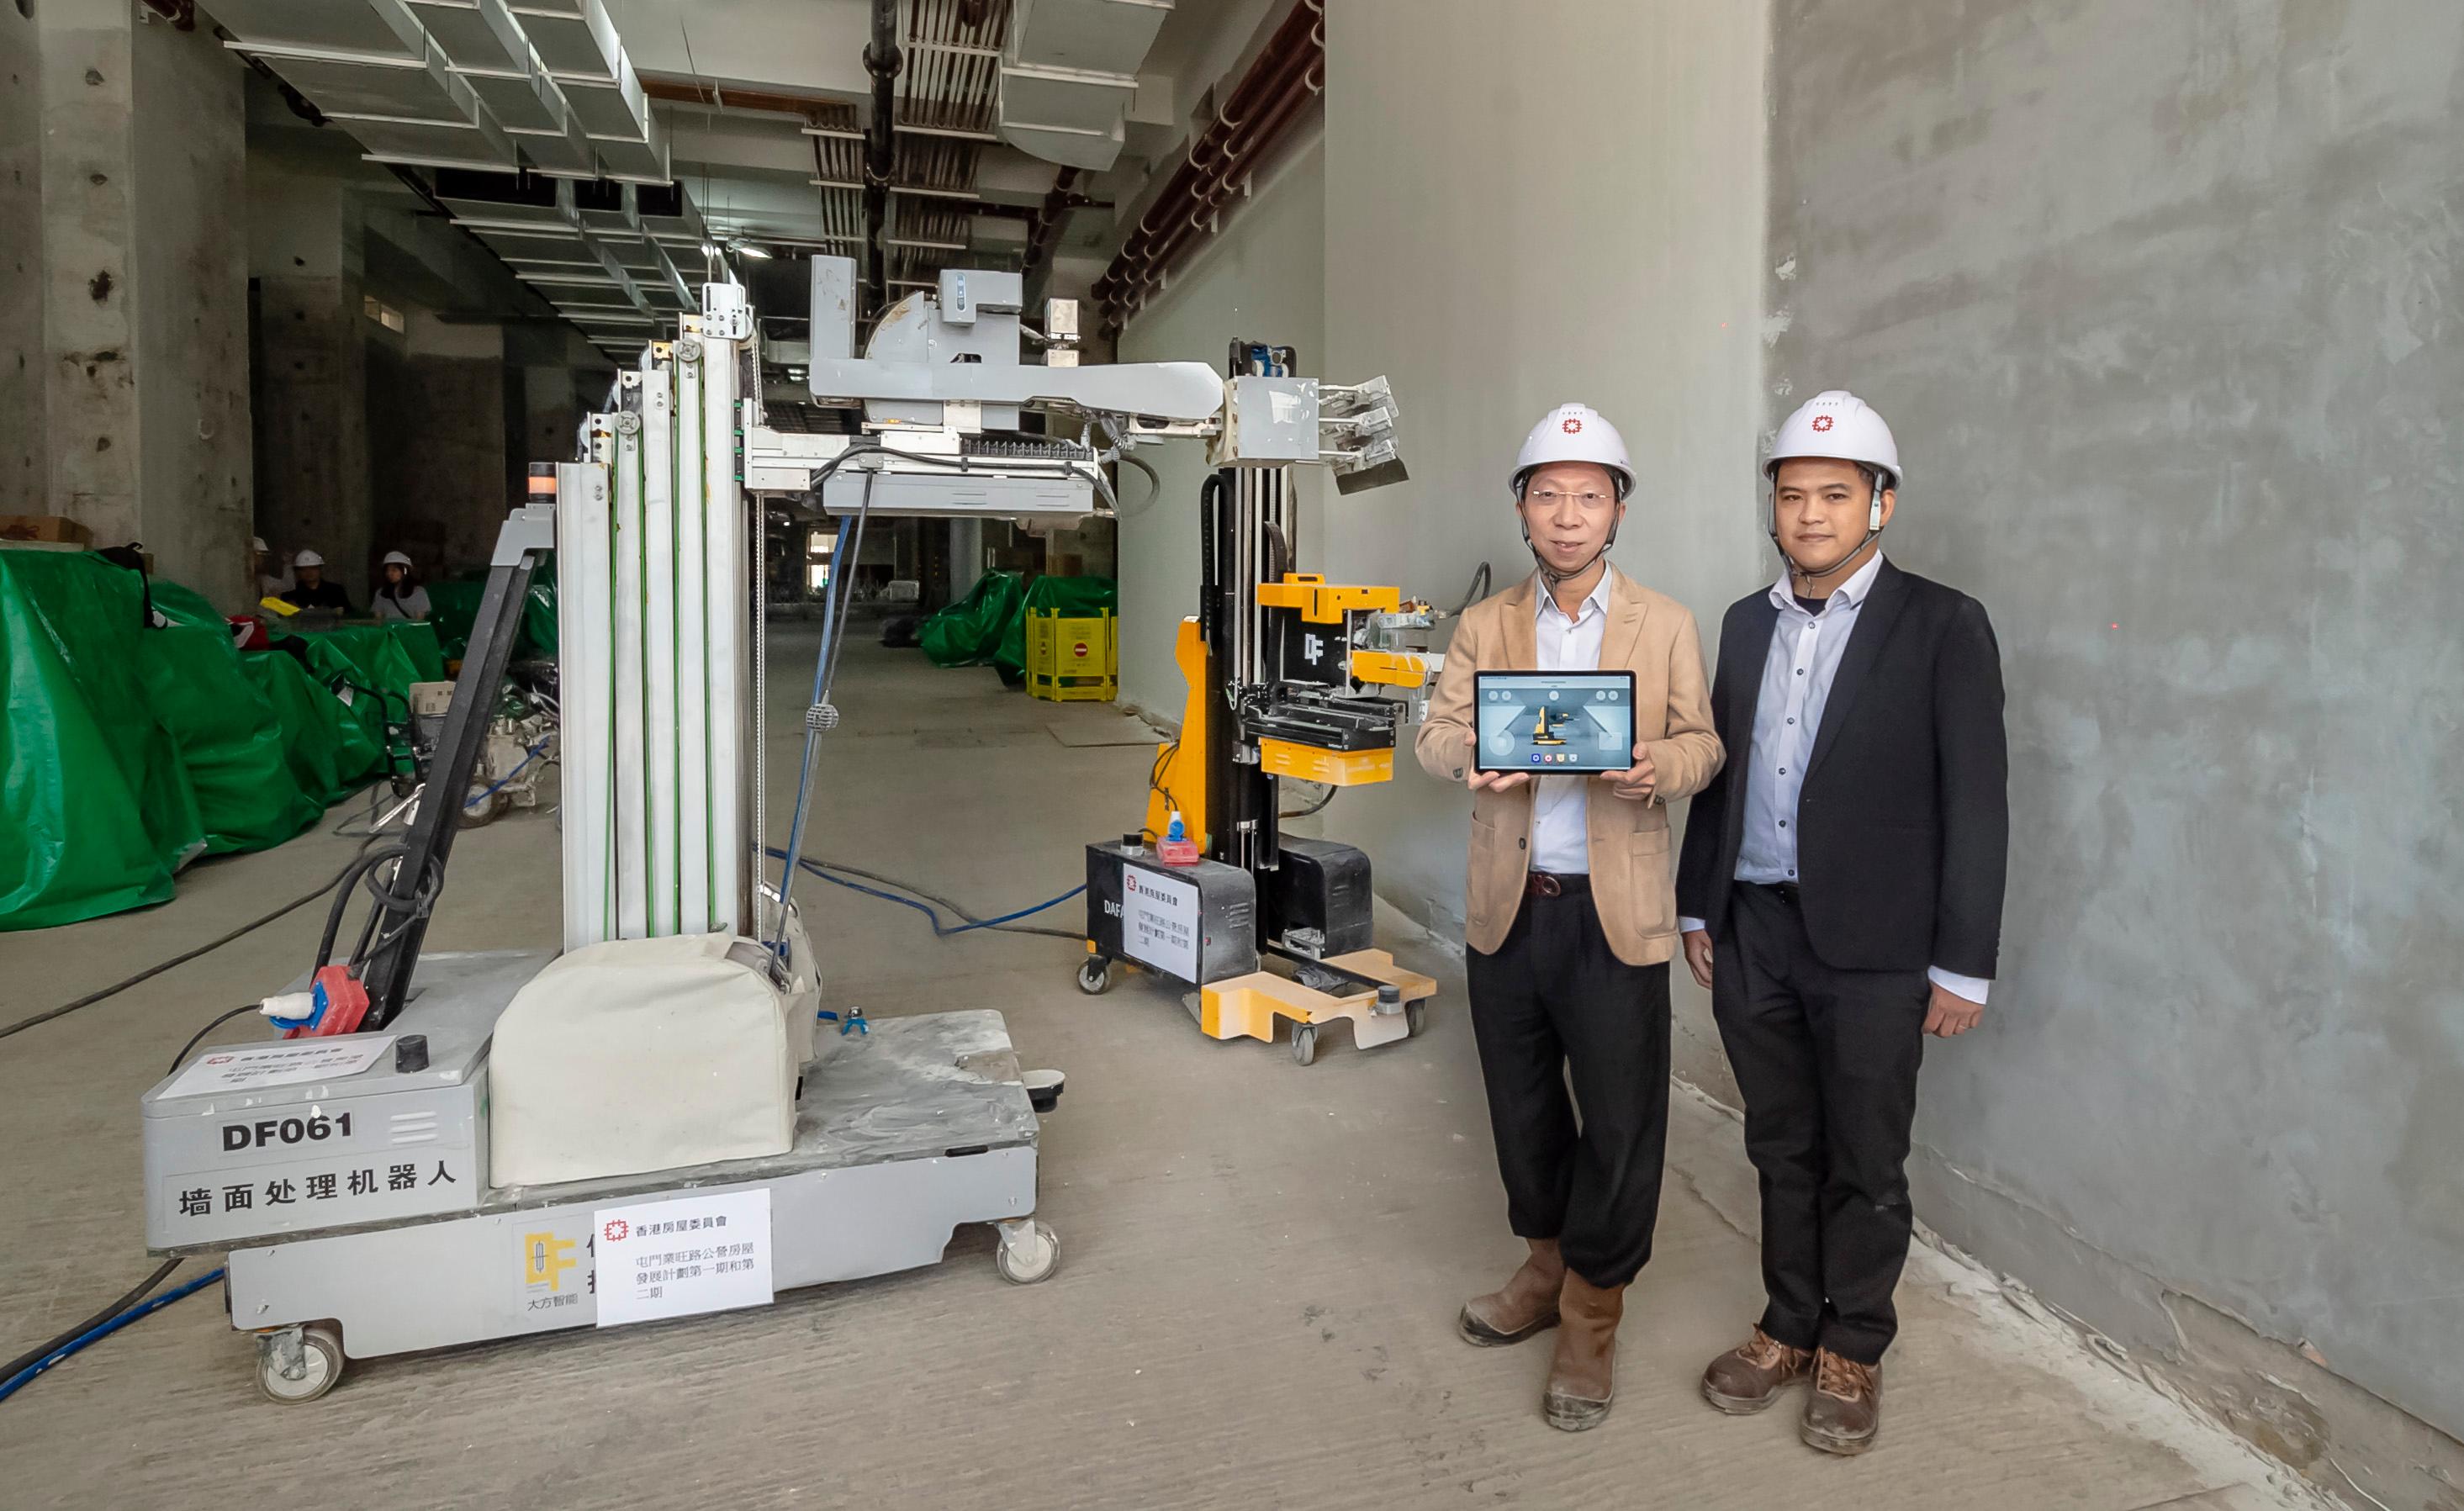 The Hong Kong Housing Authority introduced multifunctional indoor construction robot, the first of its kind, to boost safety at public housing sites. Photo shows the Head/Development and Construction InnoTech, Mr Romeo Yiu (left), and Structural Engineer Mr Arthur Leung (right) of the Housing Department with two multifunctional indoor construction robots.
